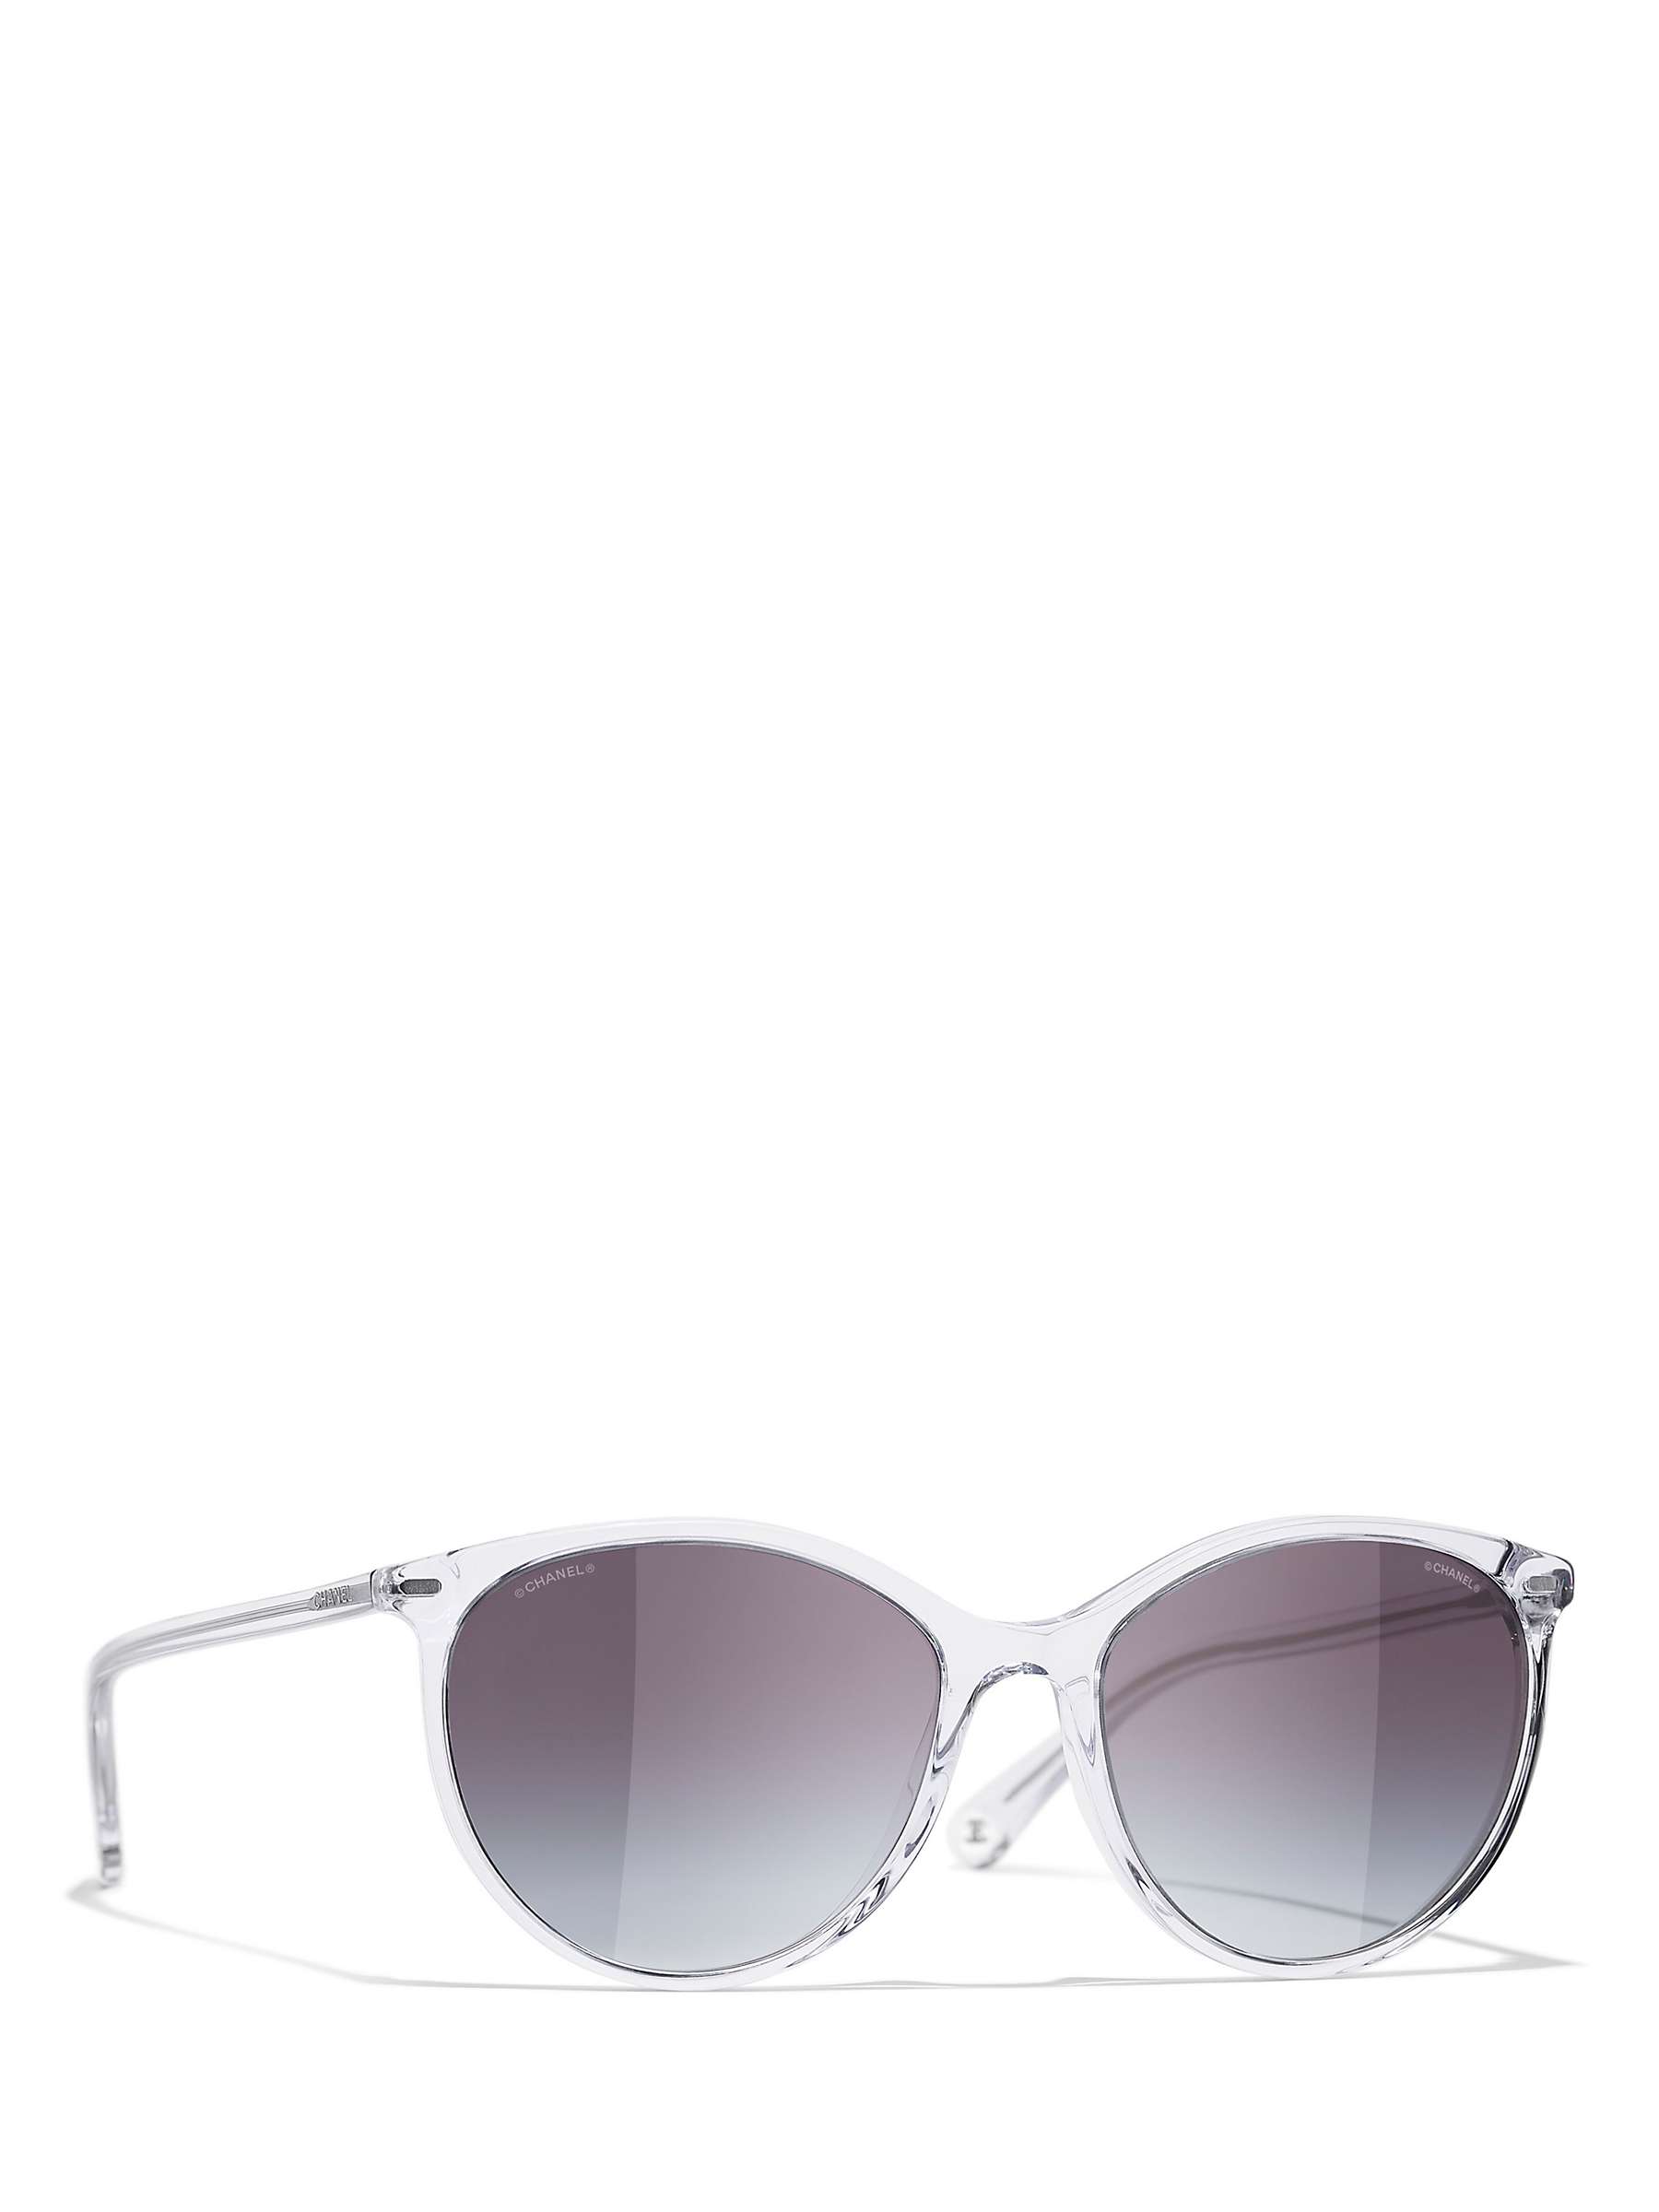 Buy CHANEL Oval Sunglasses CH5448 Clear/Blue Gradient Online at johnlewis.com